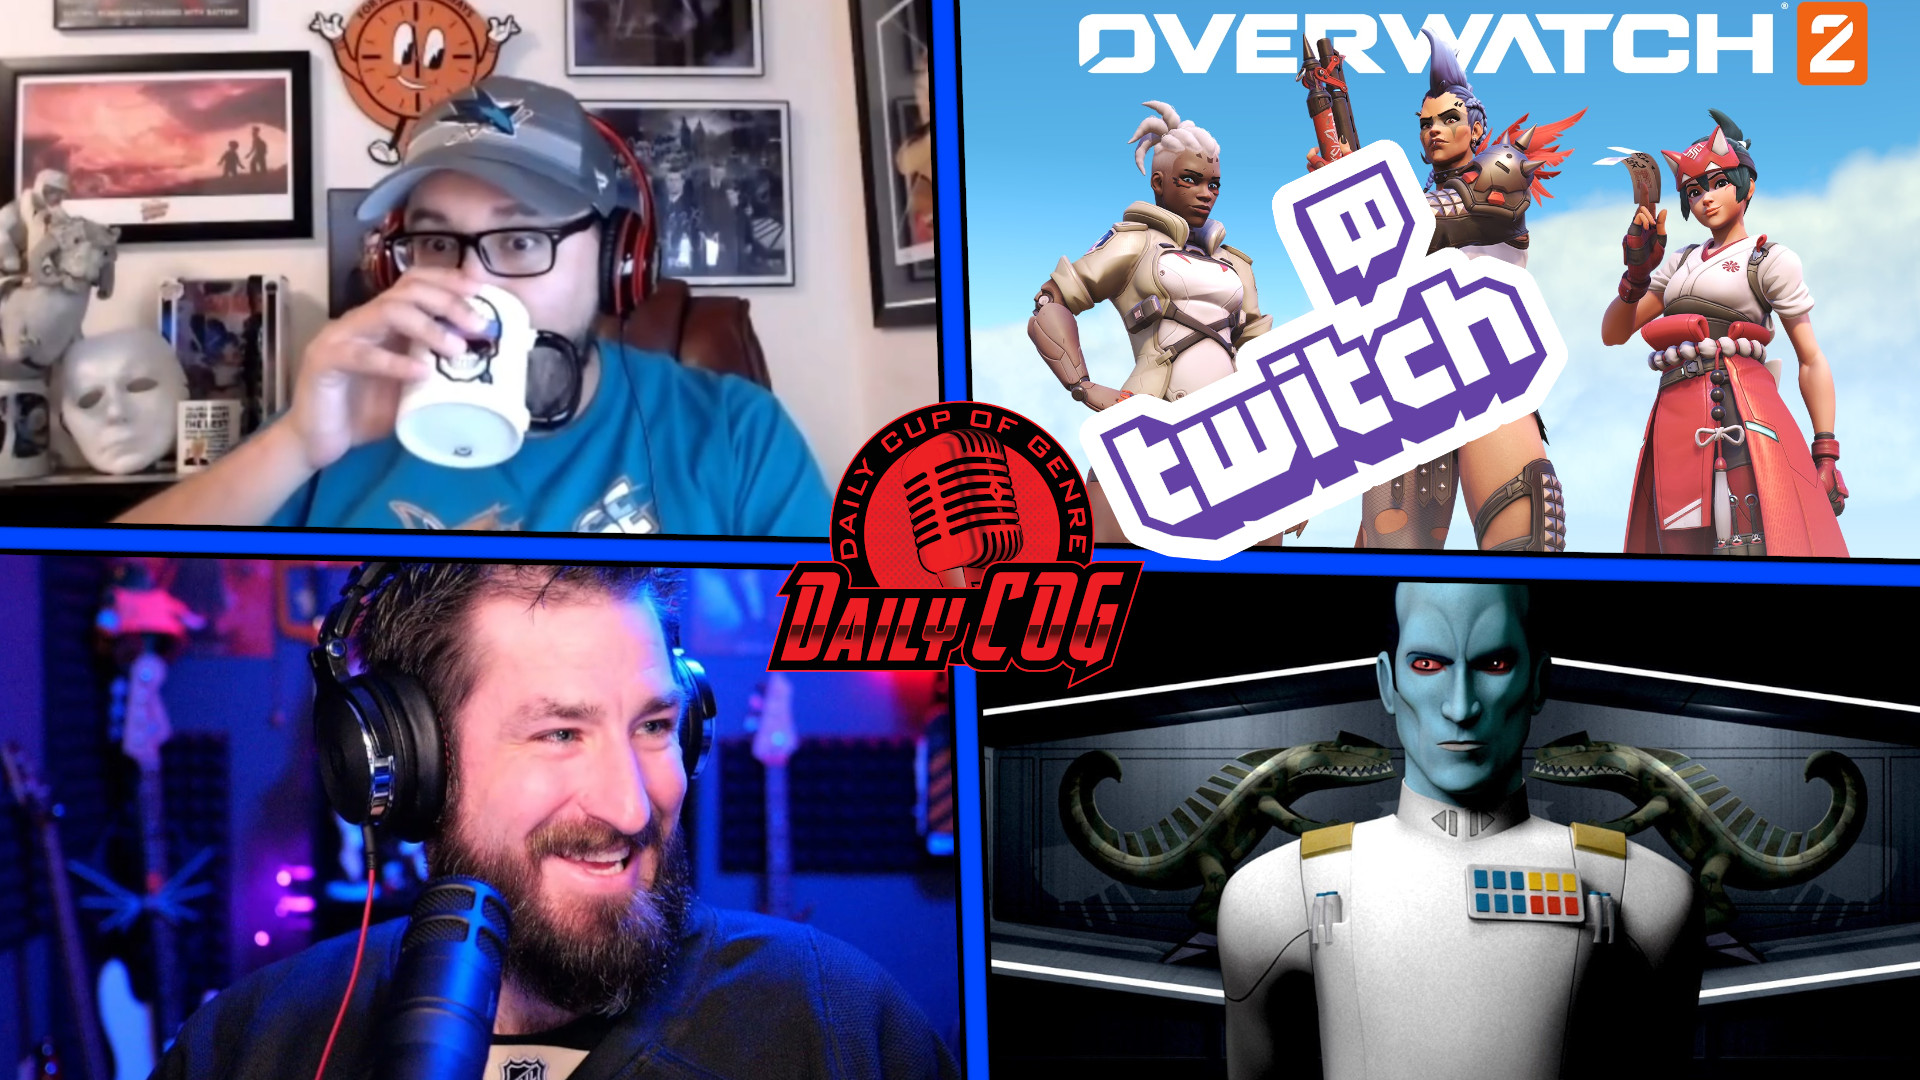 Tech Tues: Twitch Problems, Game Security & Thrawn Casting Rumor | D-COG